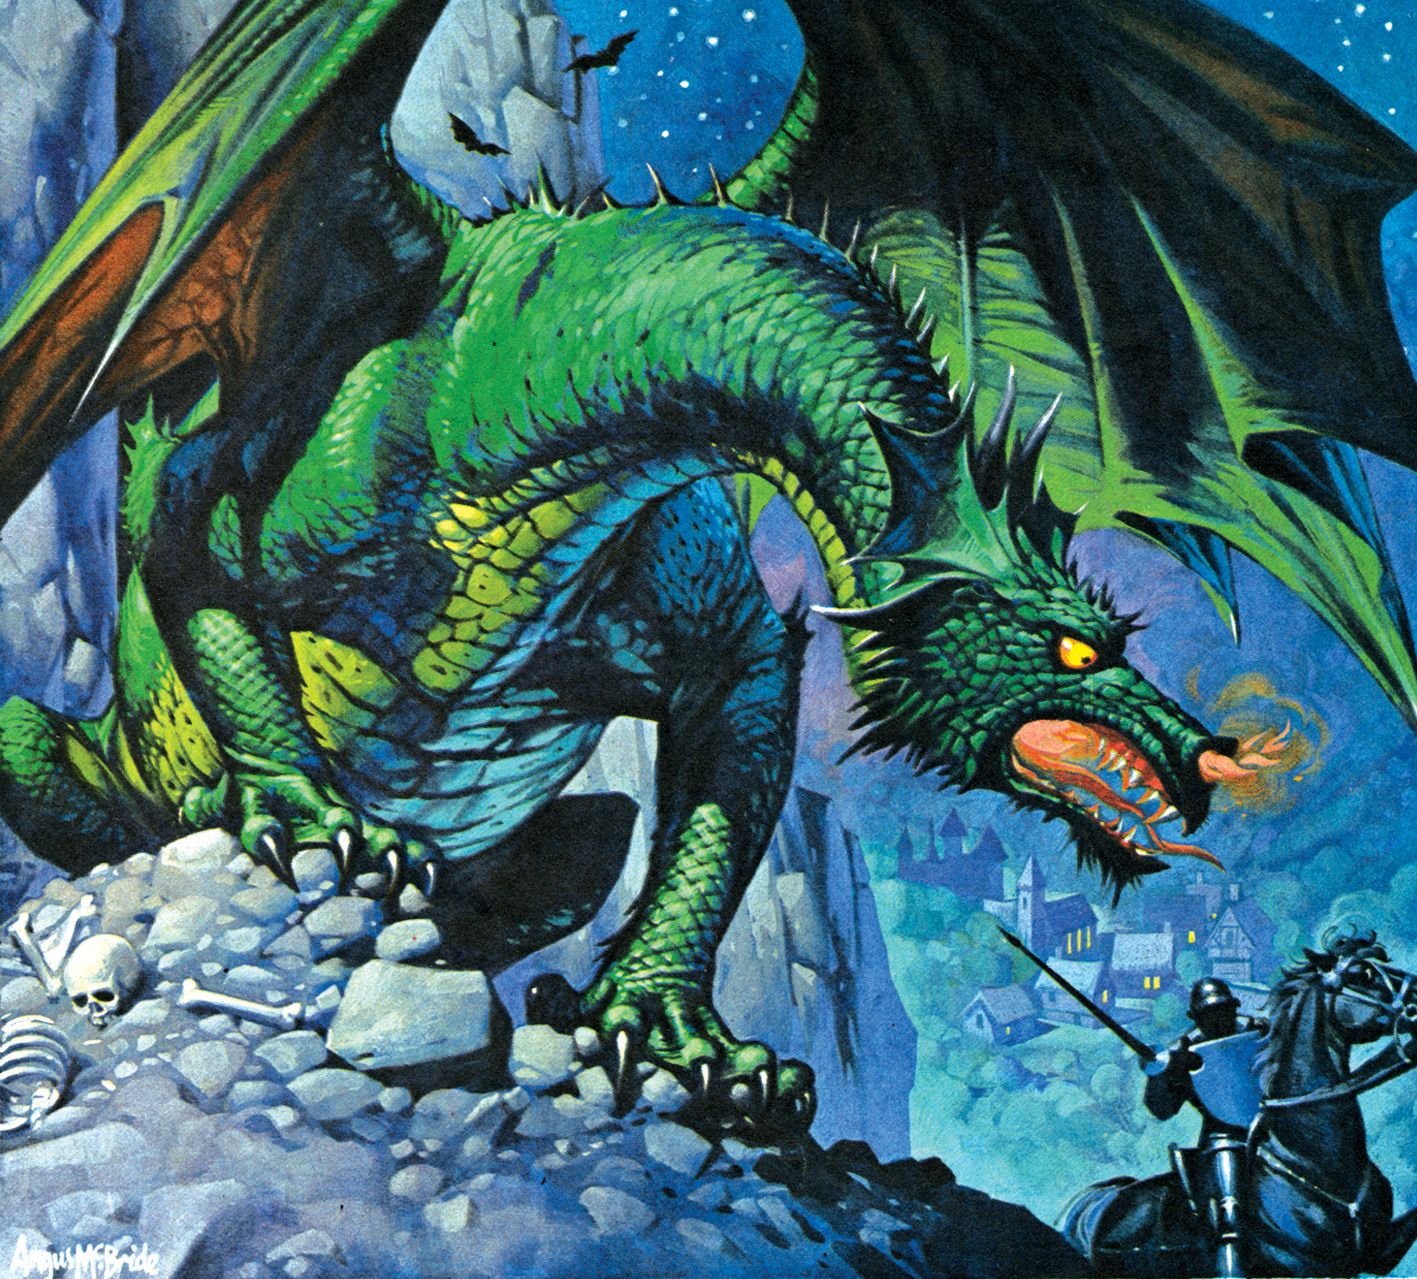 A large green dragon sits atop a pile of rocks and human bones, snarling at a knight on horseback passing by. The dragon has smoke and fire billowing from its nostrils. This scene appears to take place high atop a mountain, and in the background you can see the tiny village down below.